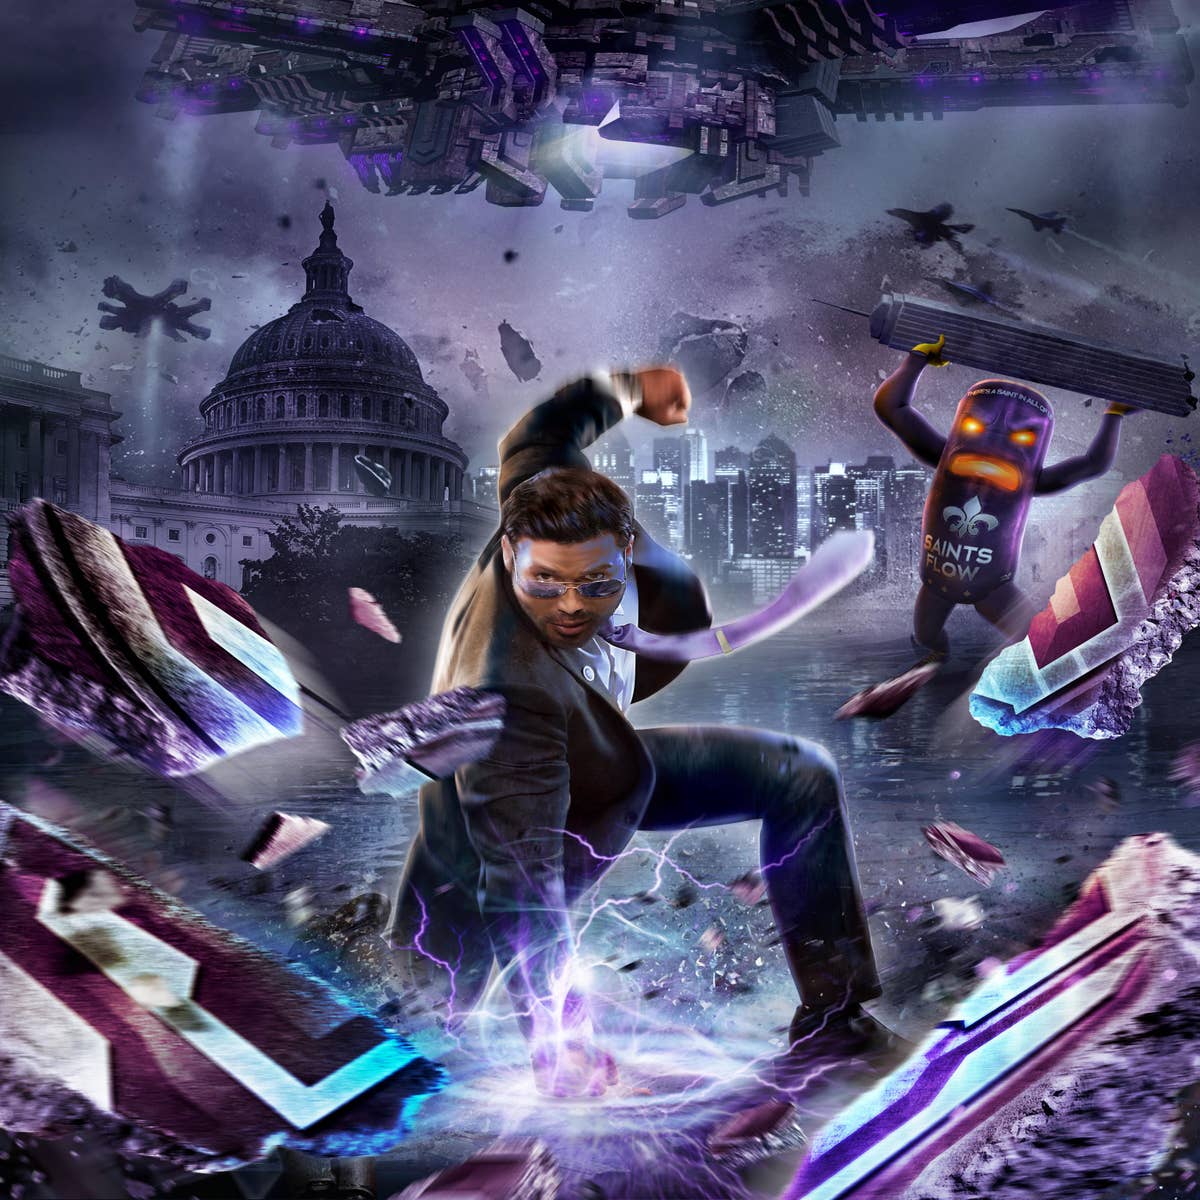 SAINTS ROW IV: Re-Elected, THQ-Nordic, Nintendo Switch